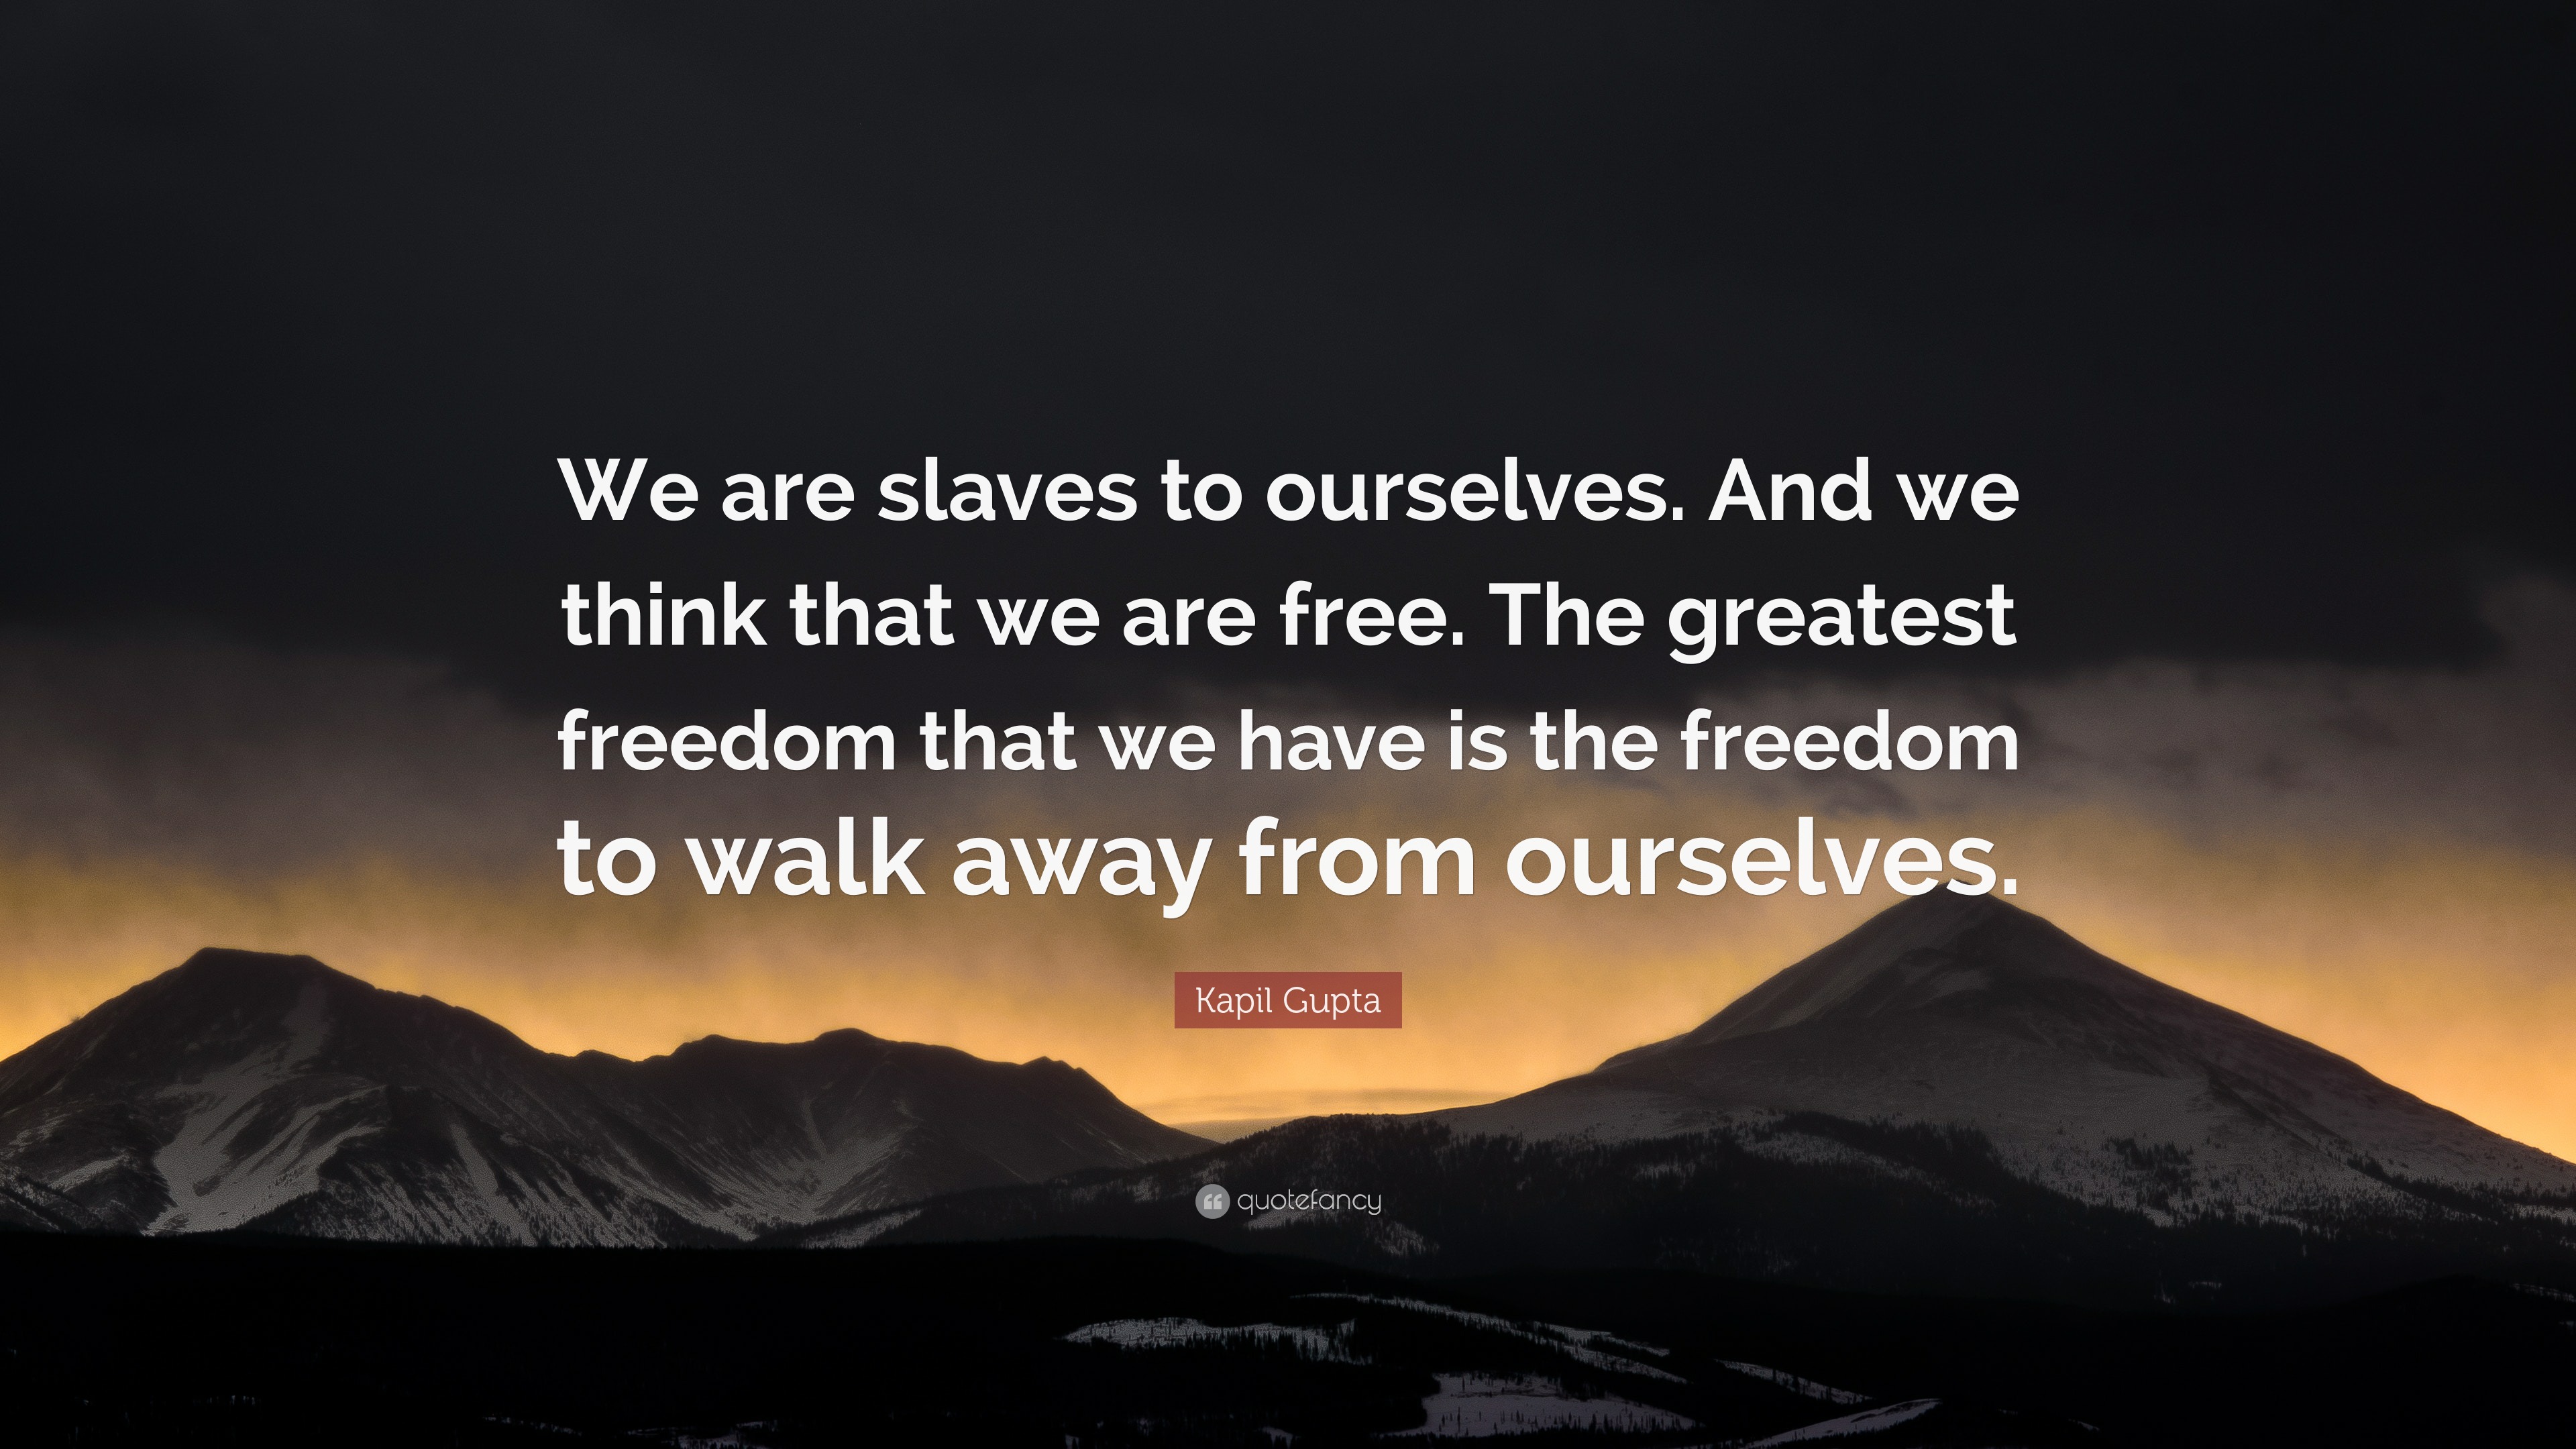 Kapil Gupta Quote: “We are slaves to ourselves. And we think that we ...